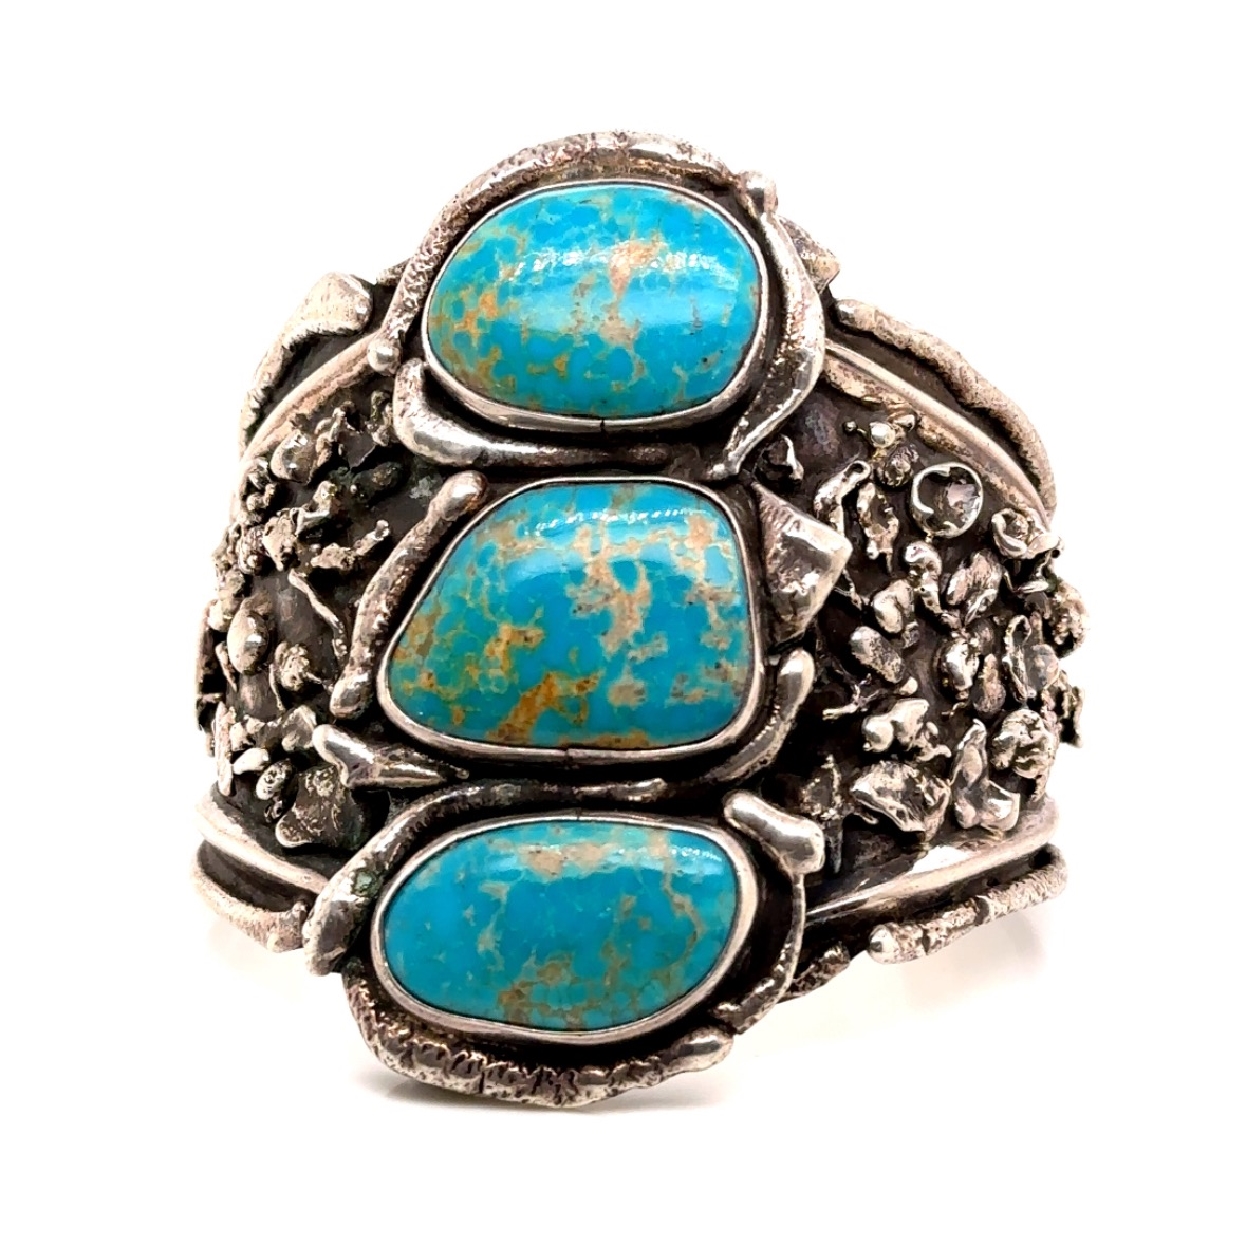 Native American Sterling Silver and Turquoise Chunky Cuff

Fits 8-9 Inch Wrist 
3 Inches at Widest